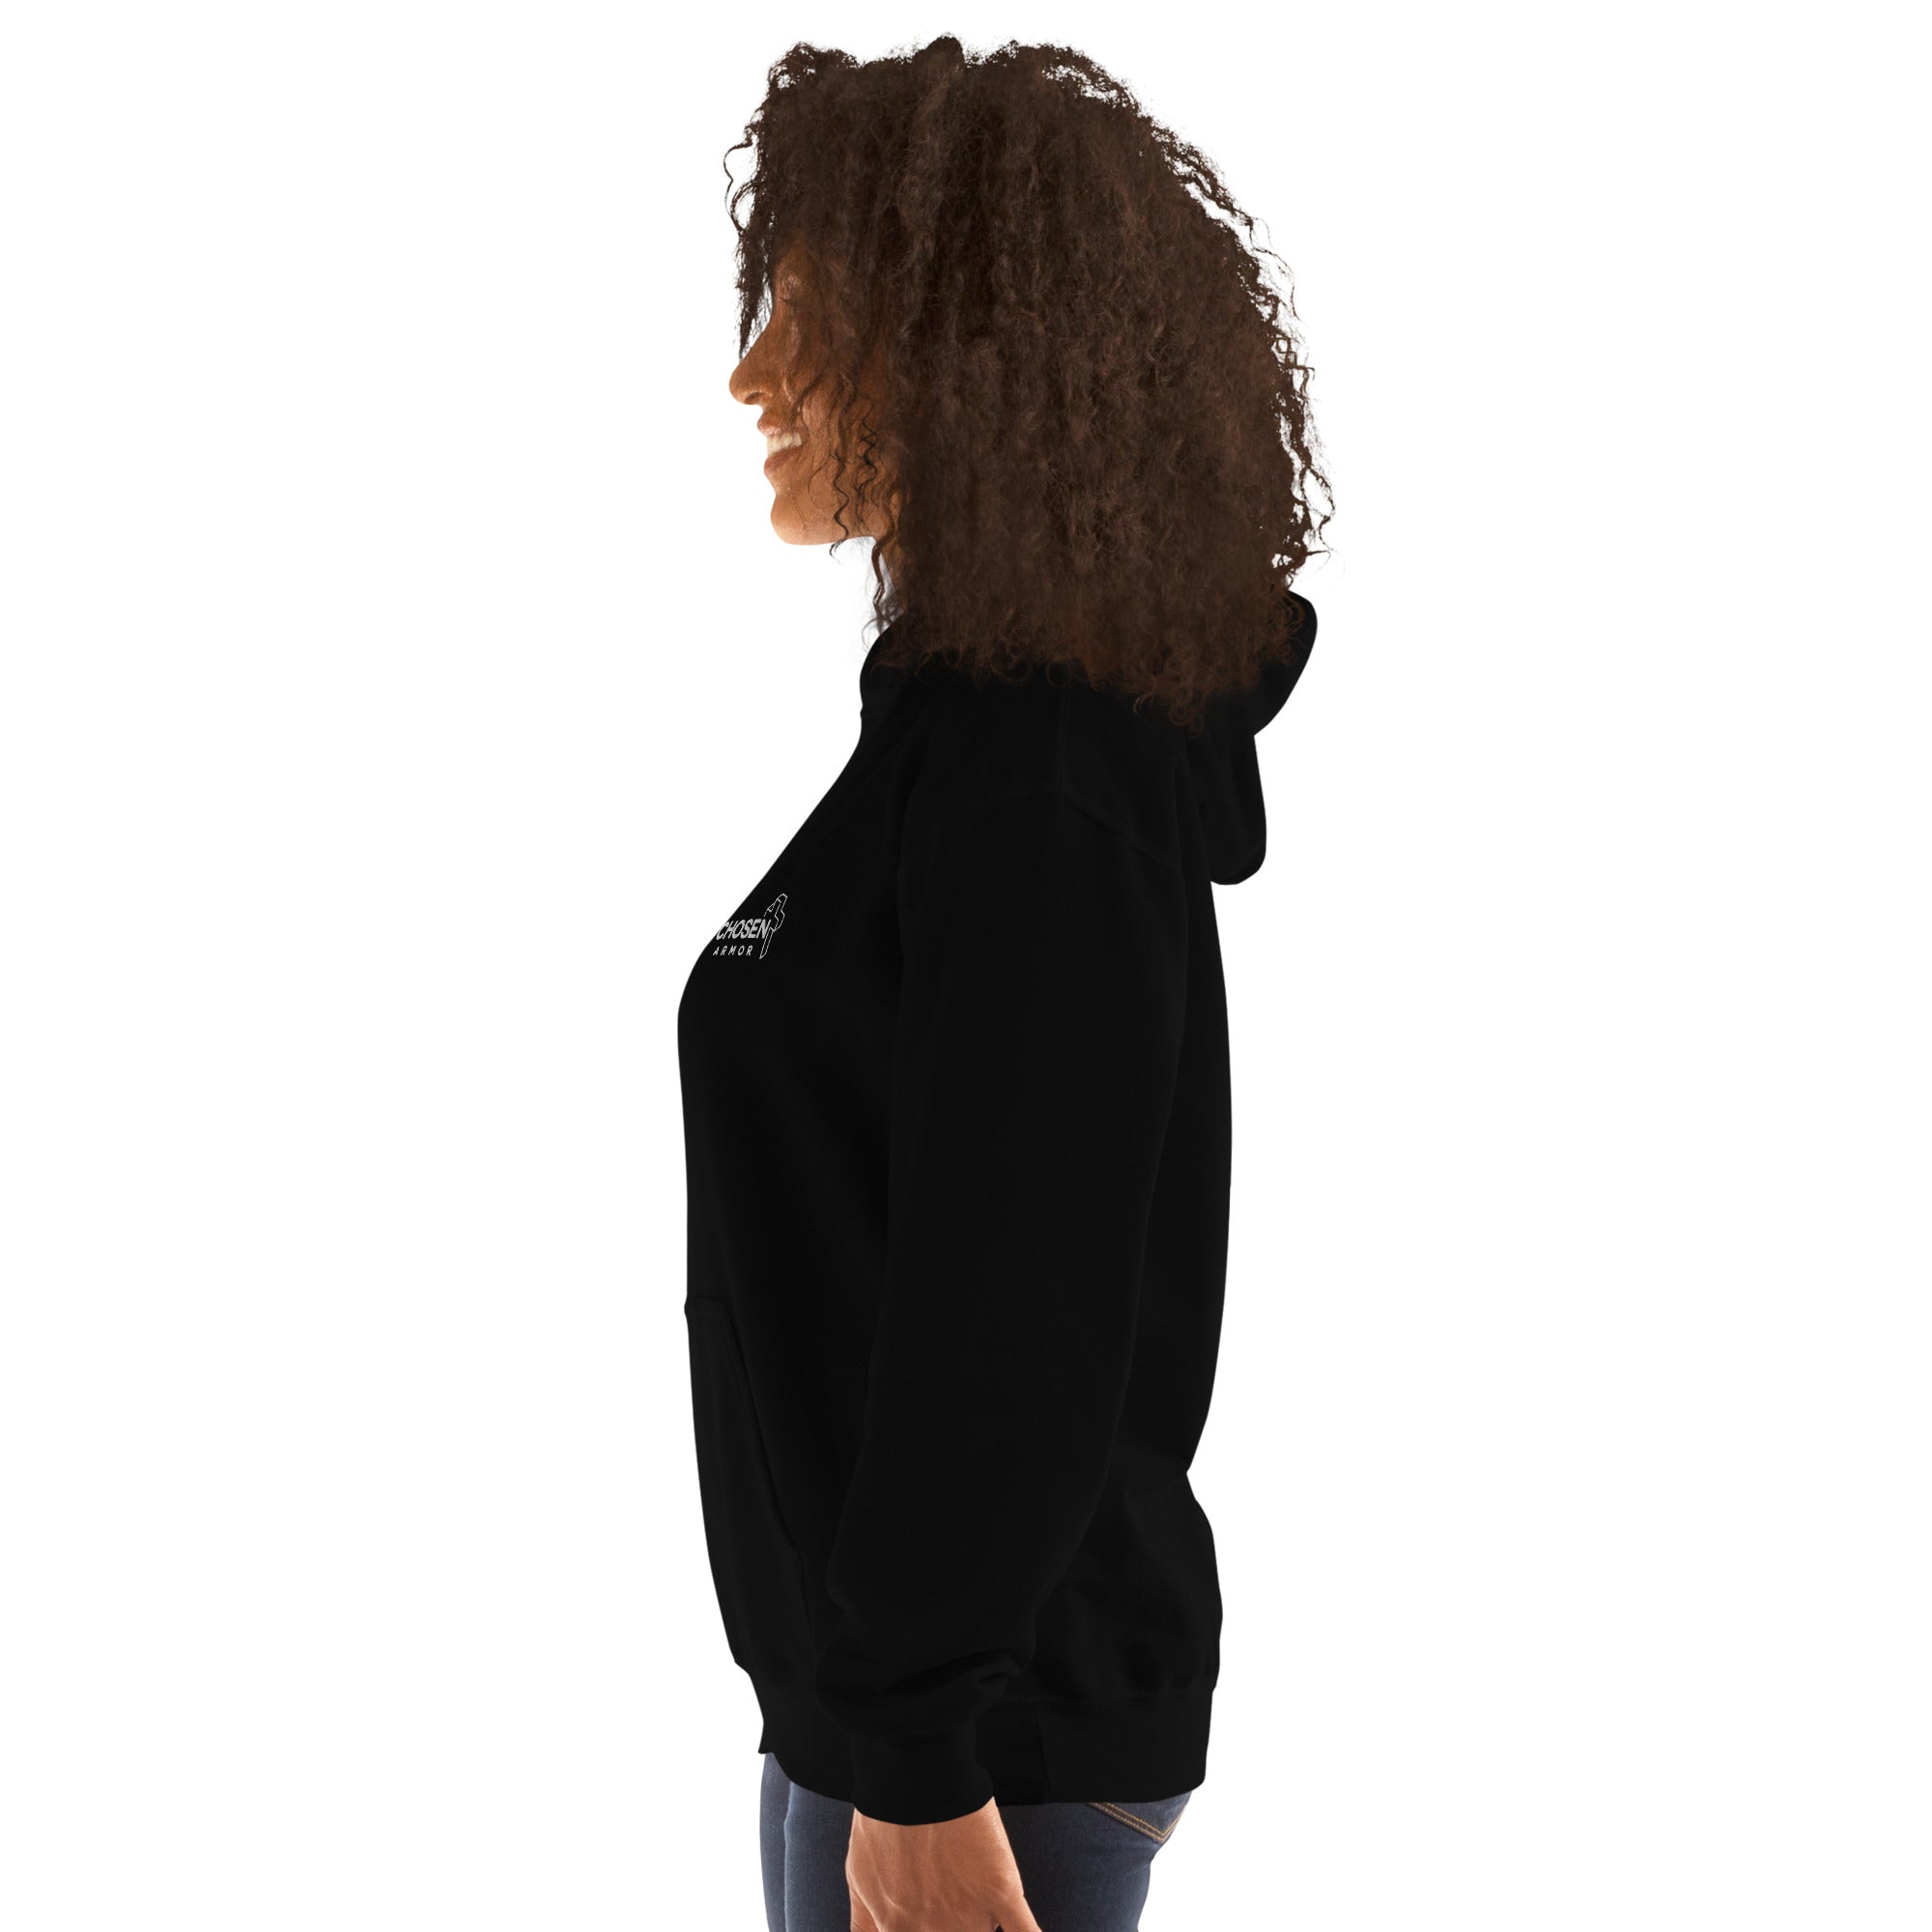 He Has Risen | Unisex Hoodie | Embroidered Logo